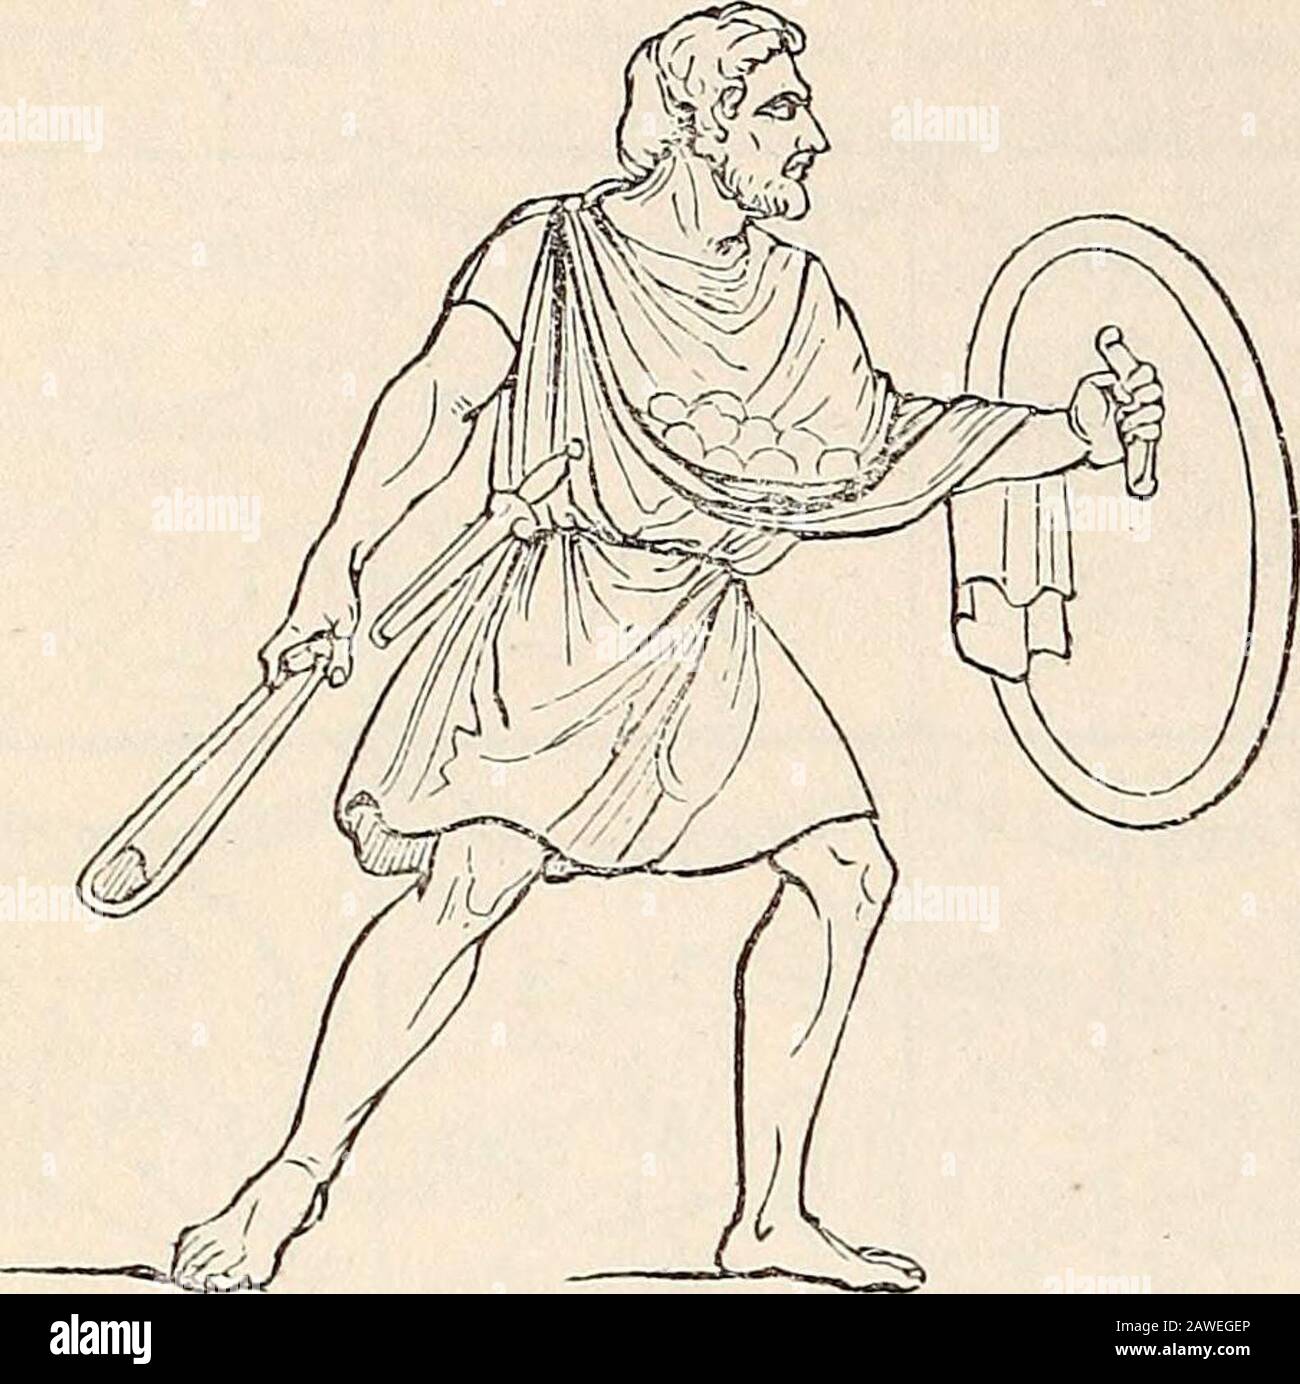 A dictionary of Greek and Roman antiquities.. . y readof slingers hi these wars. Among the Greeks theAcarnanians in early times attained to the greatestexpertness in the use of this weapon (Thuc. ii. 81);and at a later time the Achaeans, especially the in-habitants of Agium, Patrae, and Dymae, were cele-brated as expert slingers. The slings of these Achae-ans were made of three thongs of leather, and not ofone only, like those of other nations. (Liv. xxxviii.29.) The people, however, who enjoyed the greatestcelebrity as slingers were the natives of the Balearicislands. Their skill in the use o Stock Photo